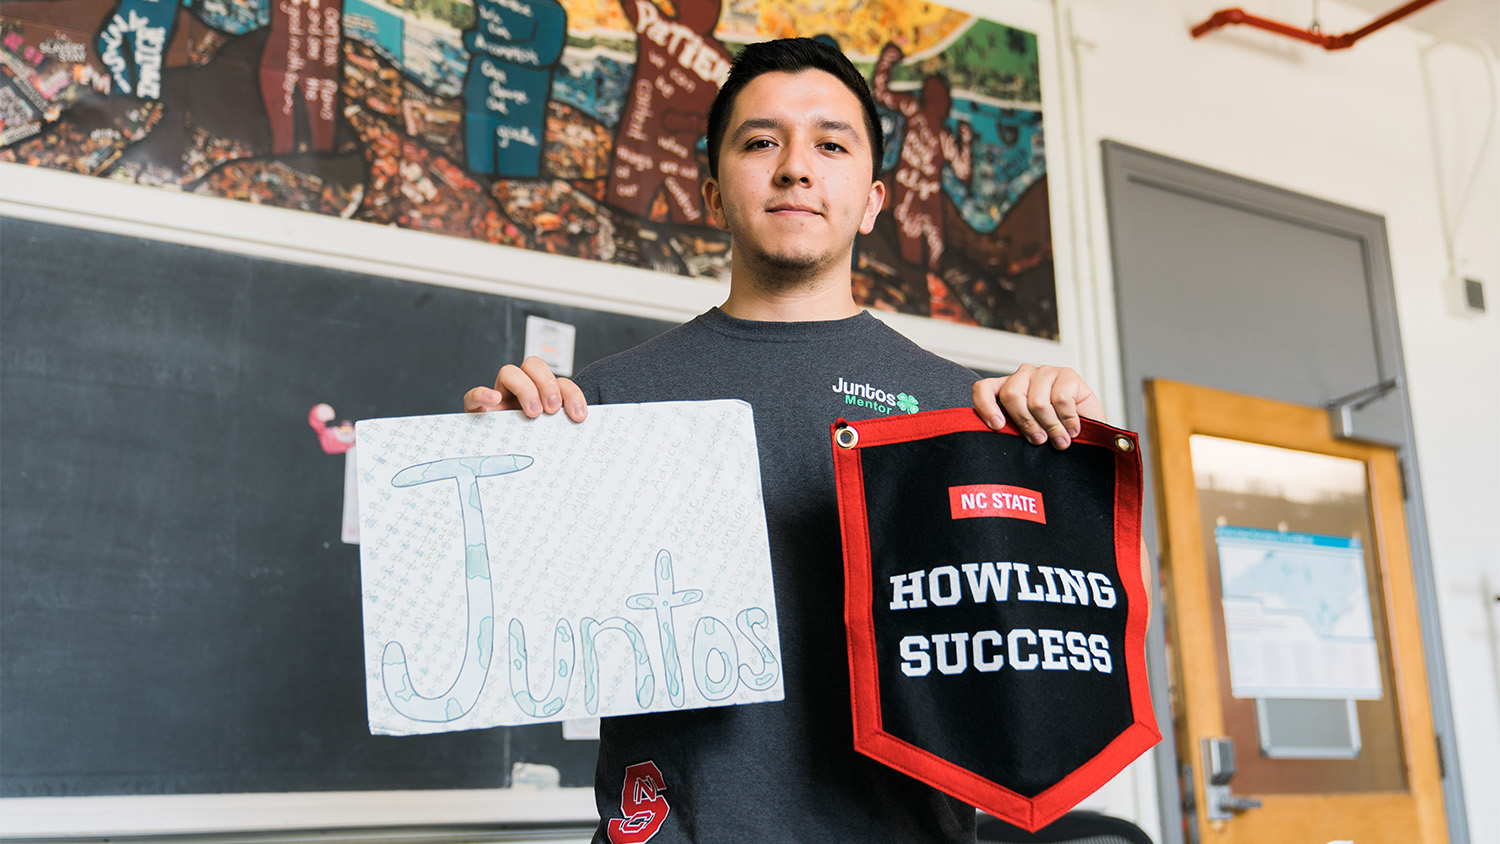 Sebastian Rios holds a white sign that reads "Juntos" in handwritten green letters and a red, black and white pennant that reads "Howling Success" in the other hand